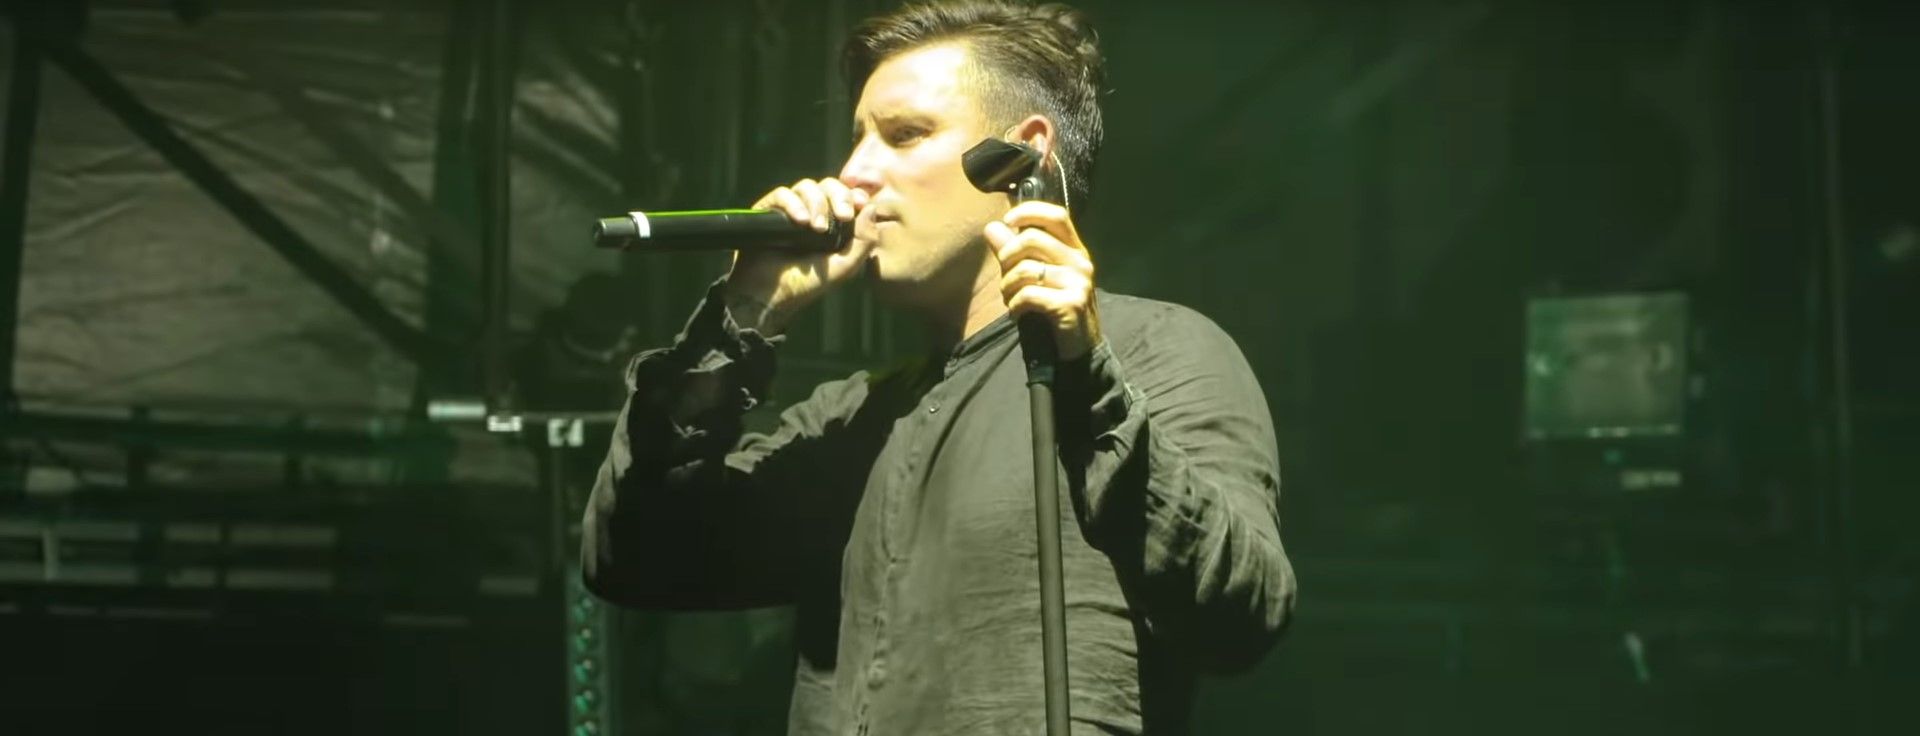 Parkway Drive - Live At Bloodstock 2019 (Full)